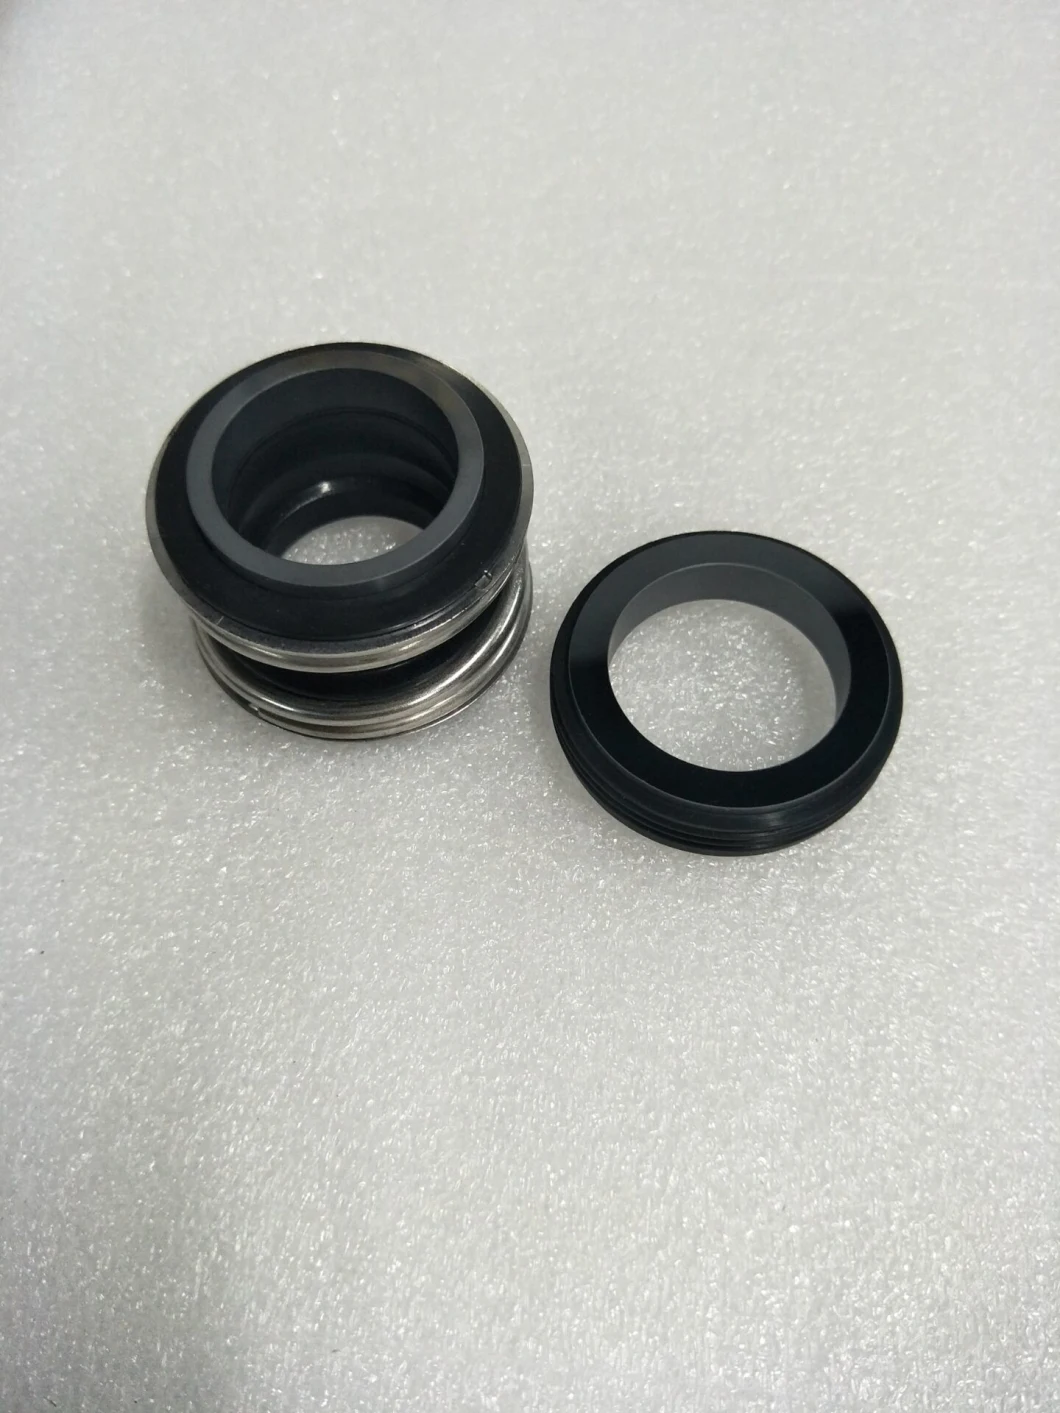 Hidrostal Rubber Bellow Seal, Double Mechanical Seal, Spring Pump Seal